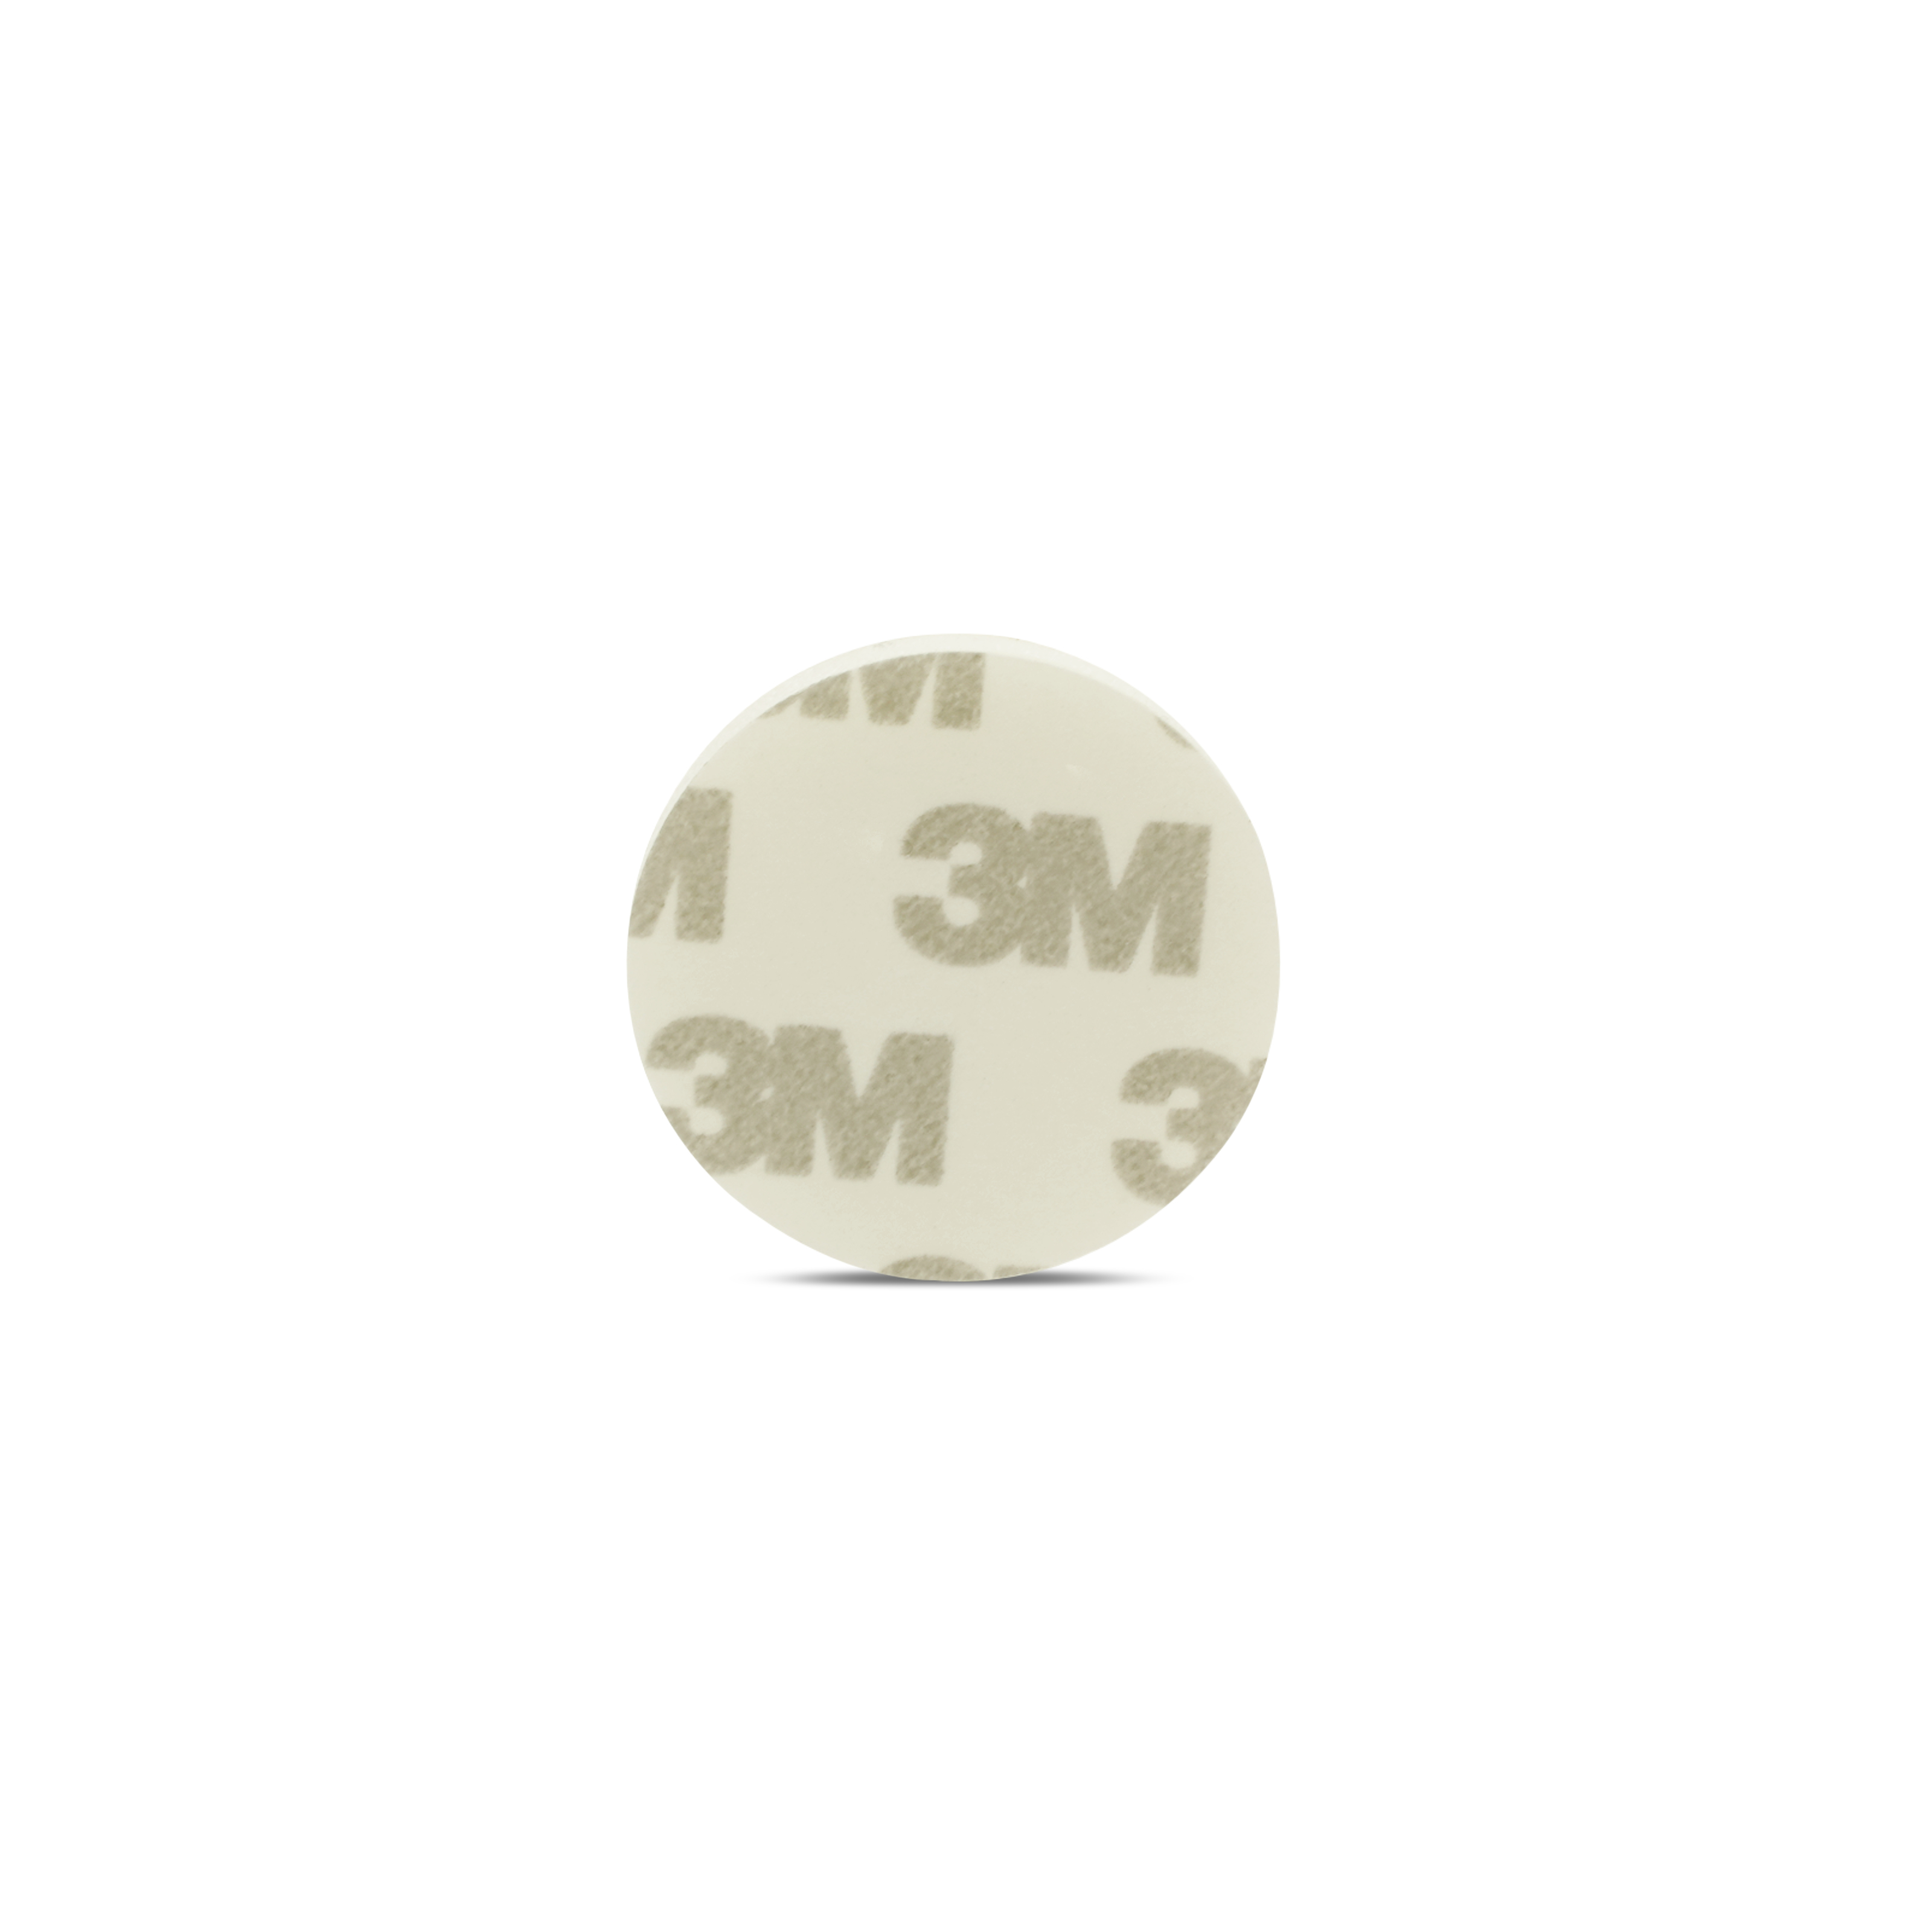 NFC Sticker PET - 30 mm - NTAG213 - 180 Byte - white - with foam